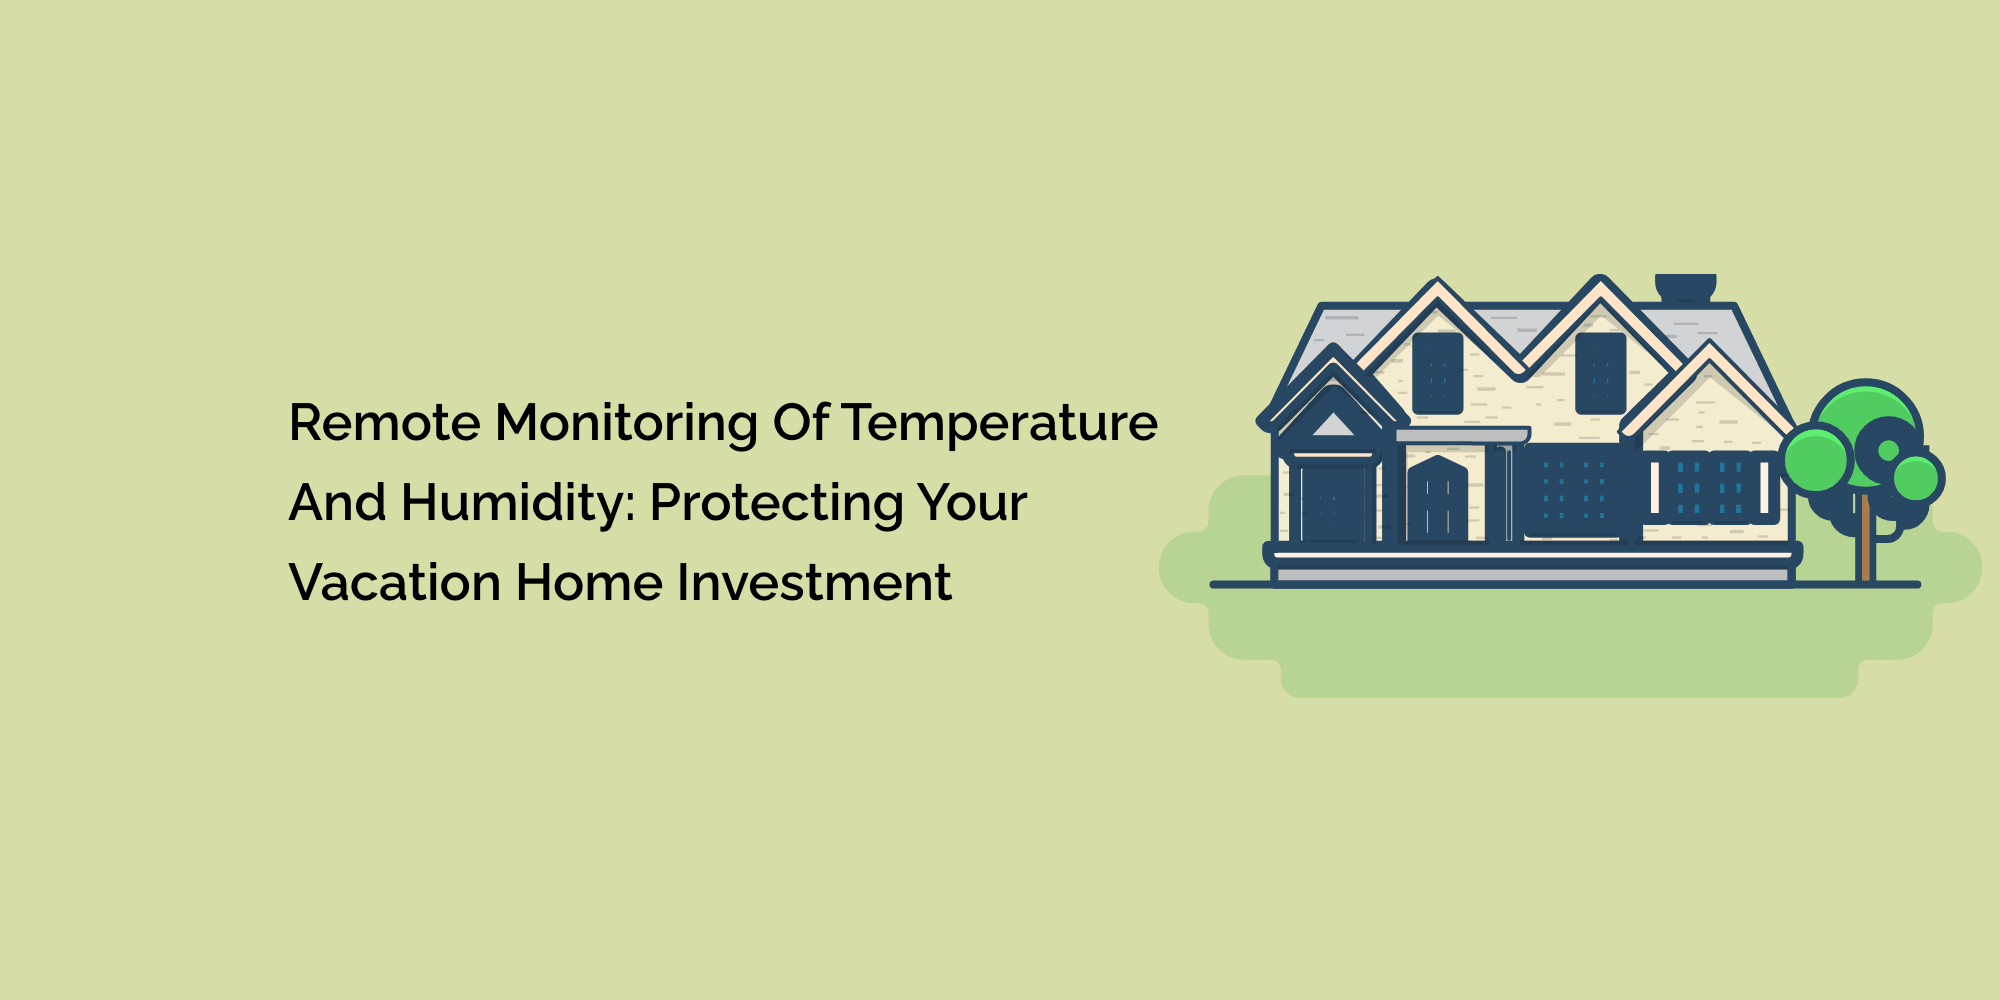 Remote Monitoring of Temperature and Humidity: Protecting Your Vacation Home Investment